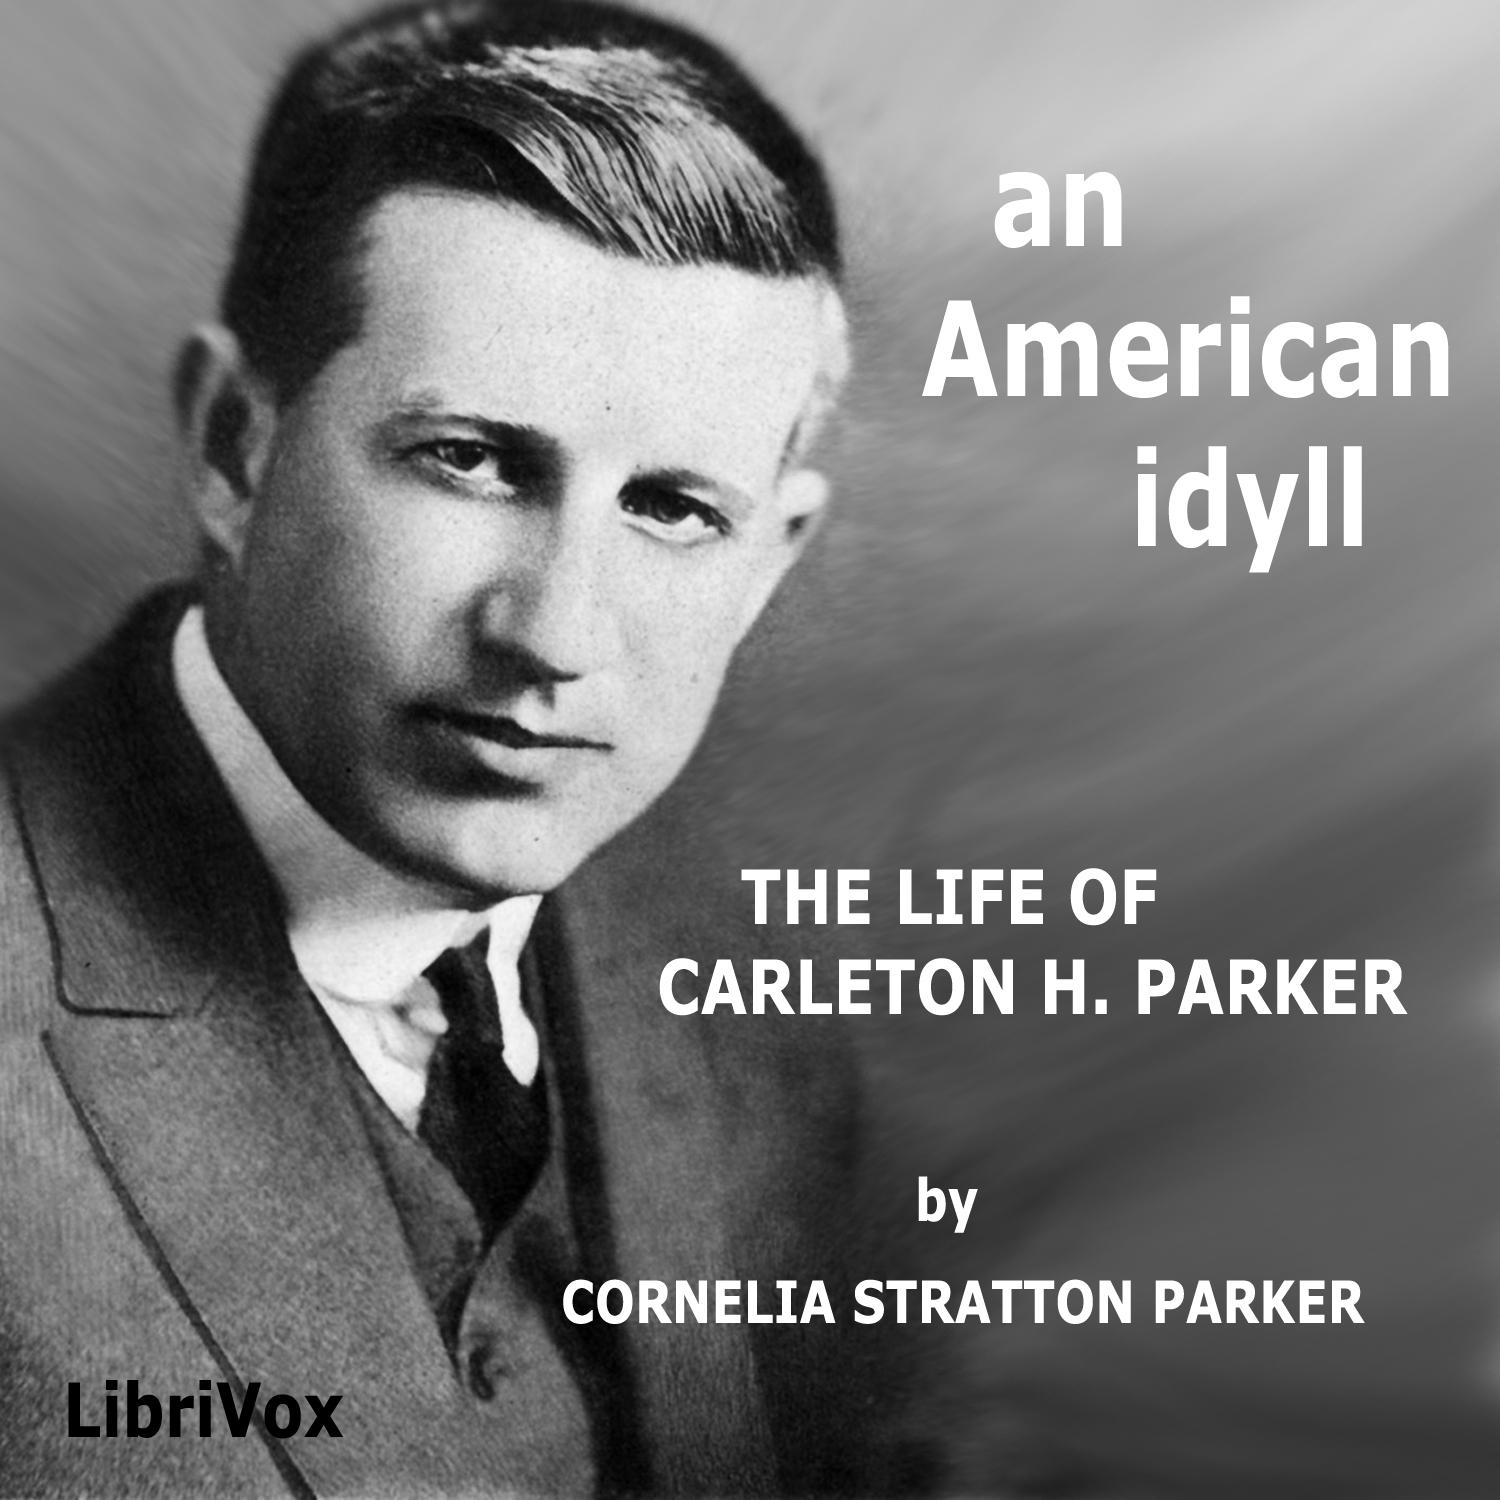 An American Idyll: The Life of Carlton H. Parker, #4 - Chapter III